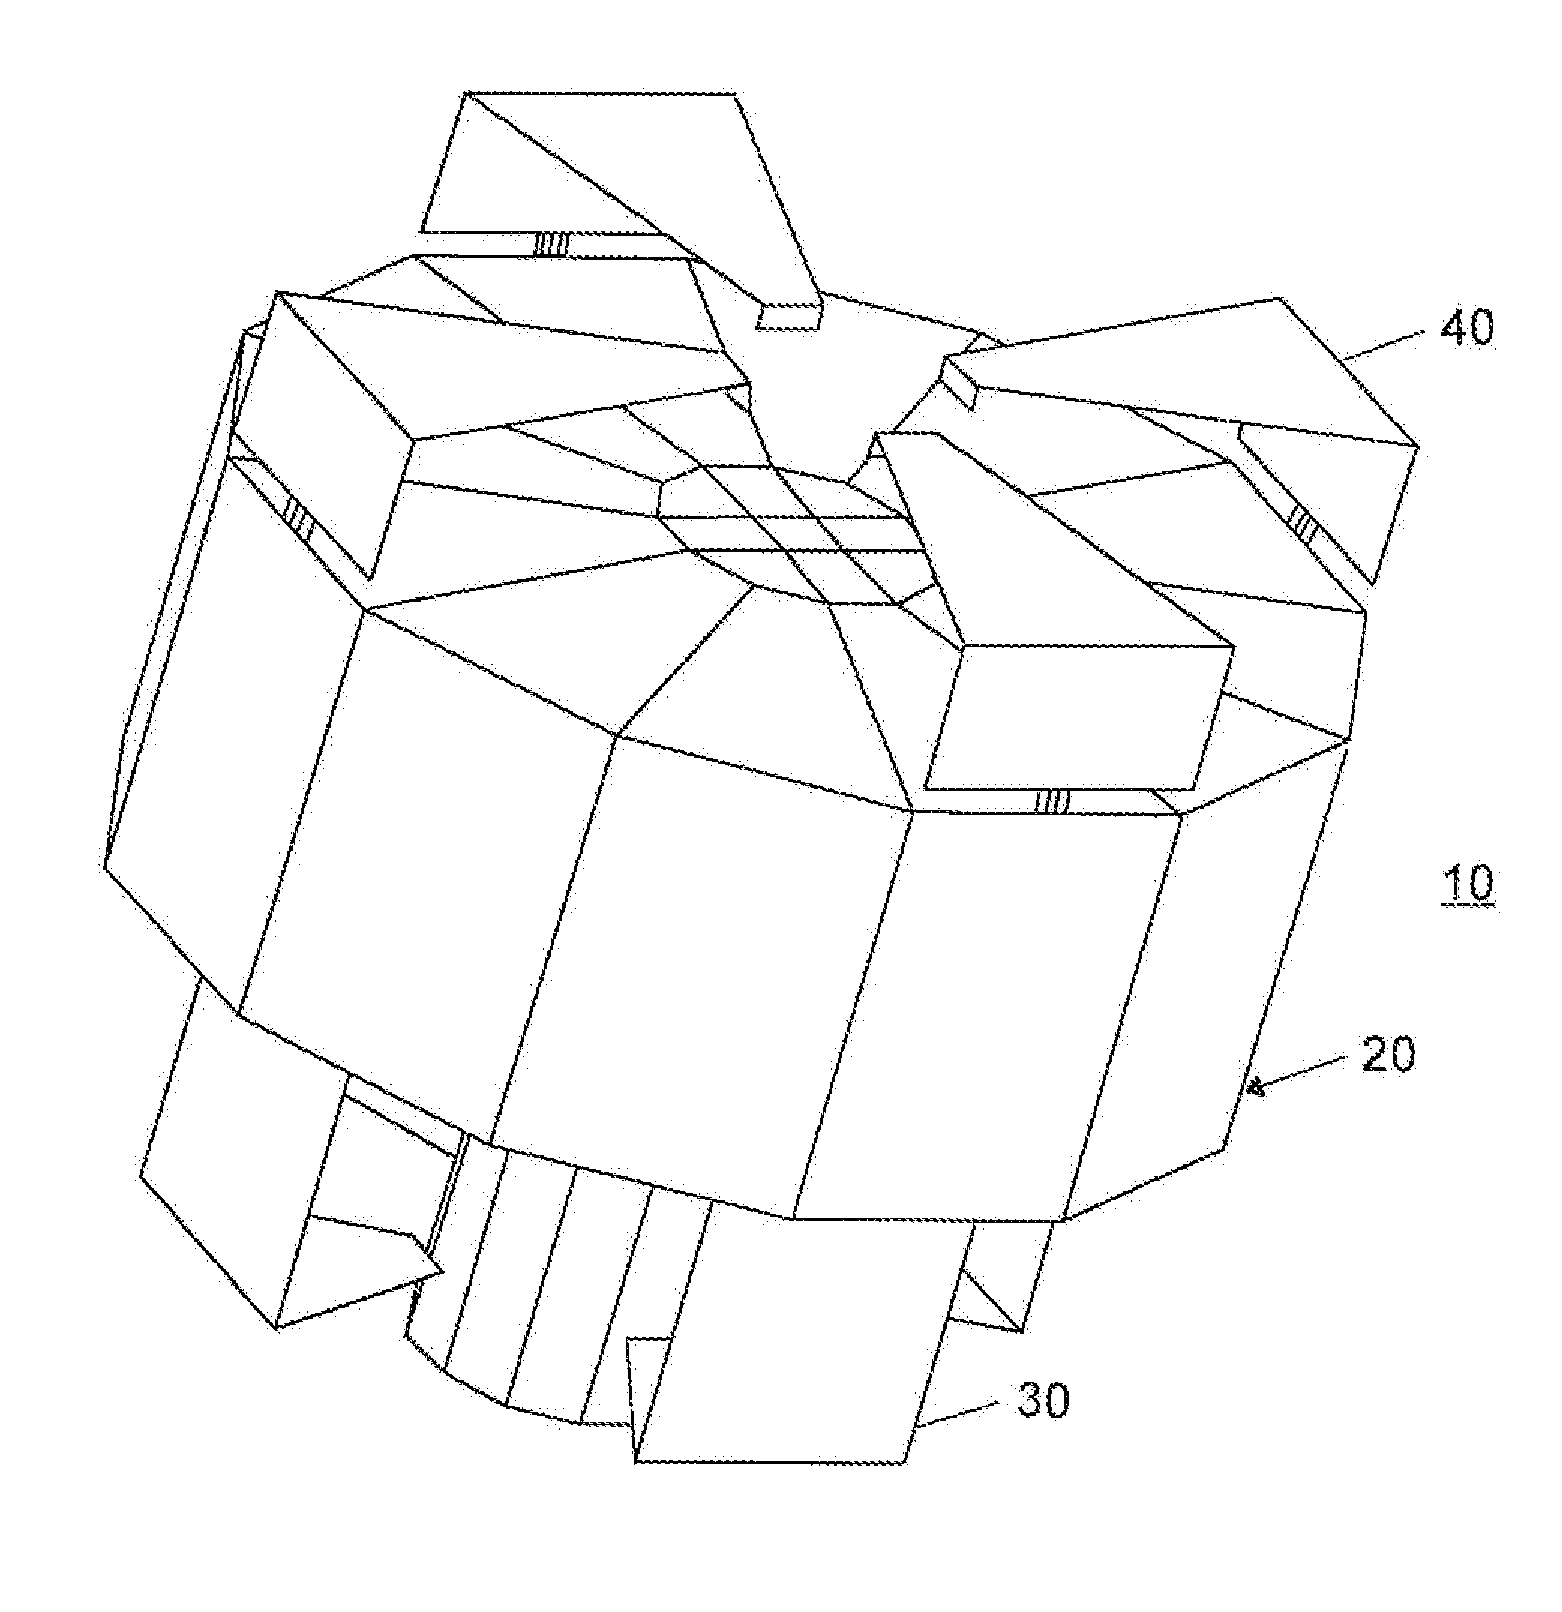 Antennas and methods to provide adaptable omnidirectional ground nulls